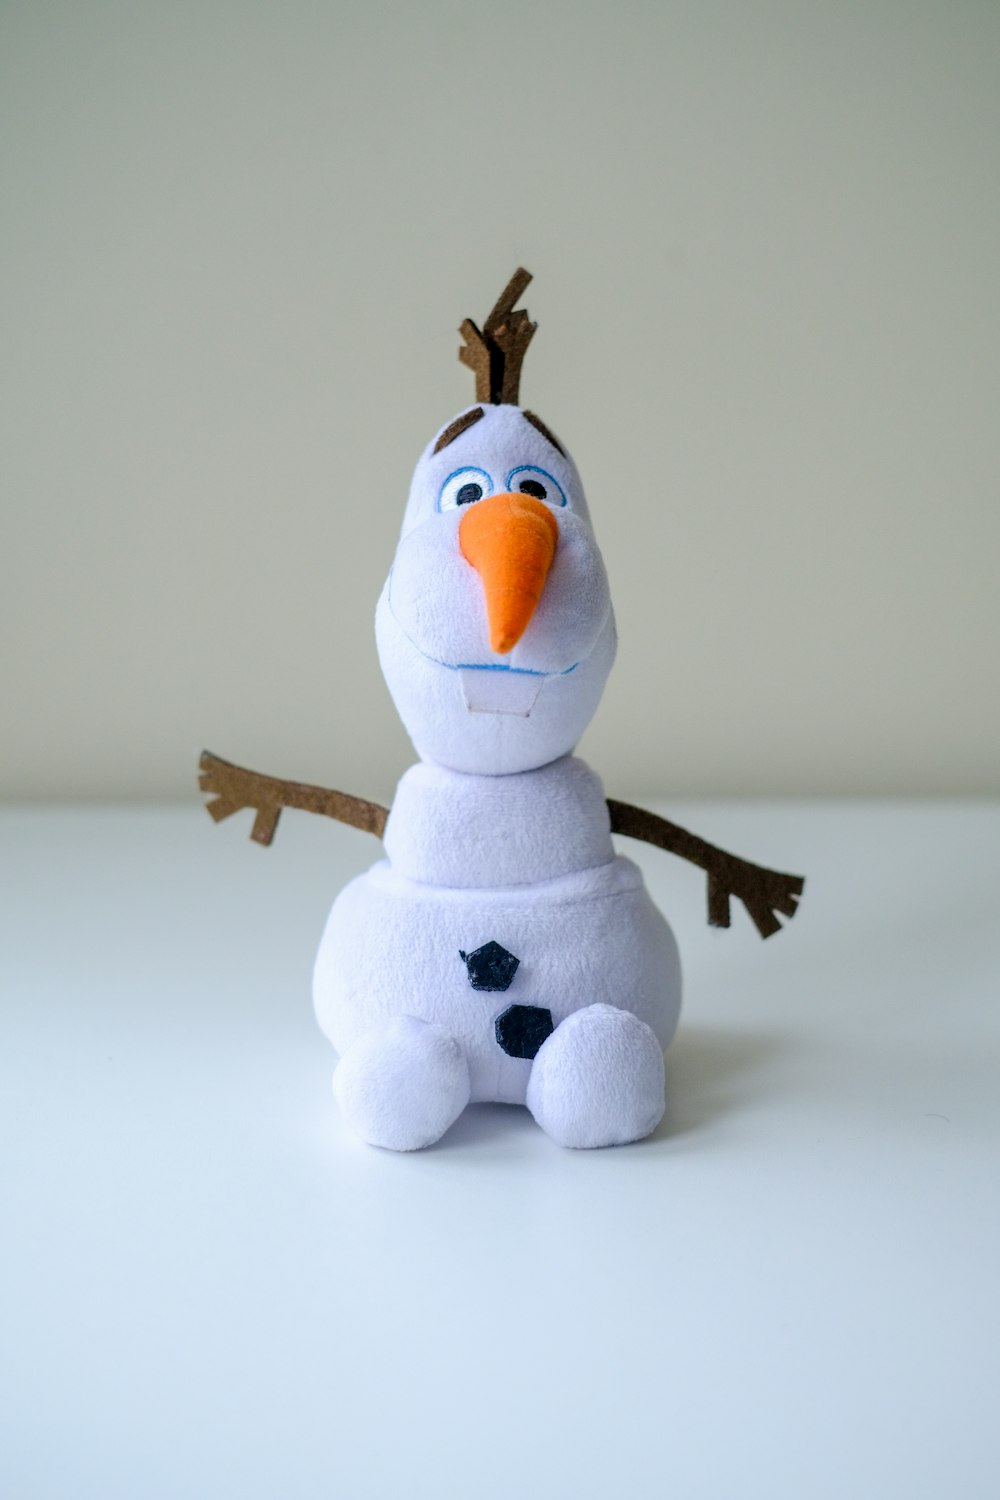 a stuffed snowman sitting on top of a white table